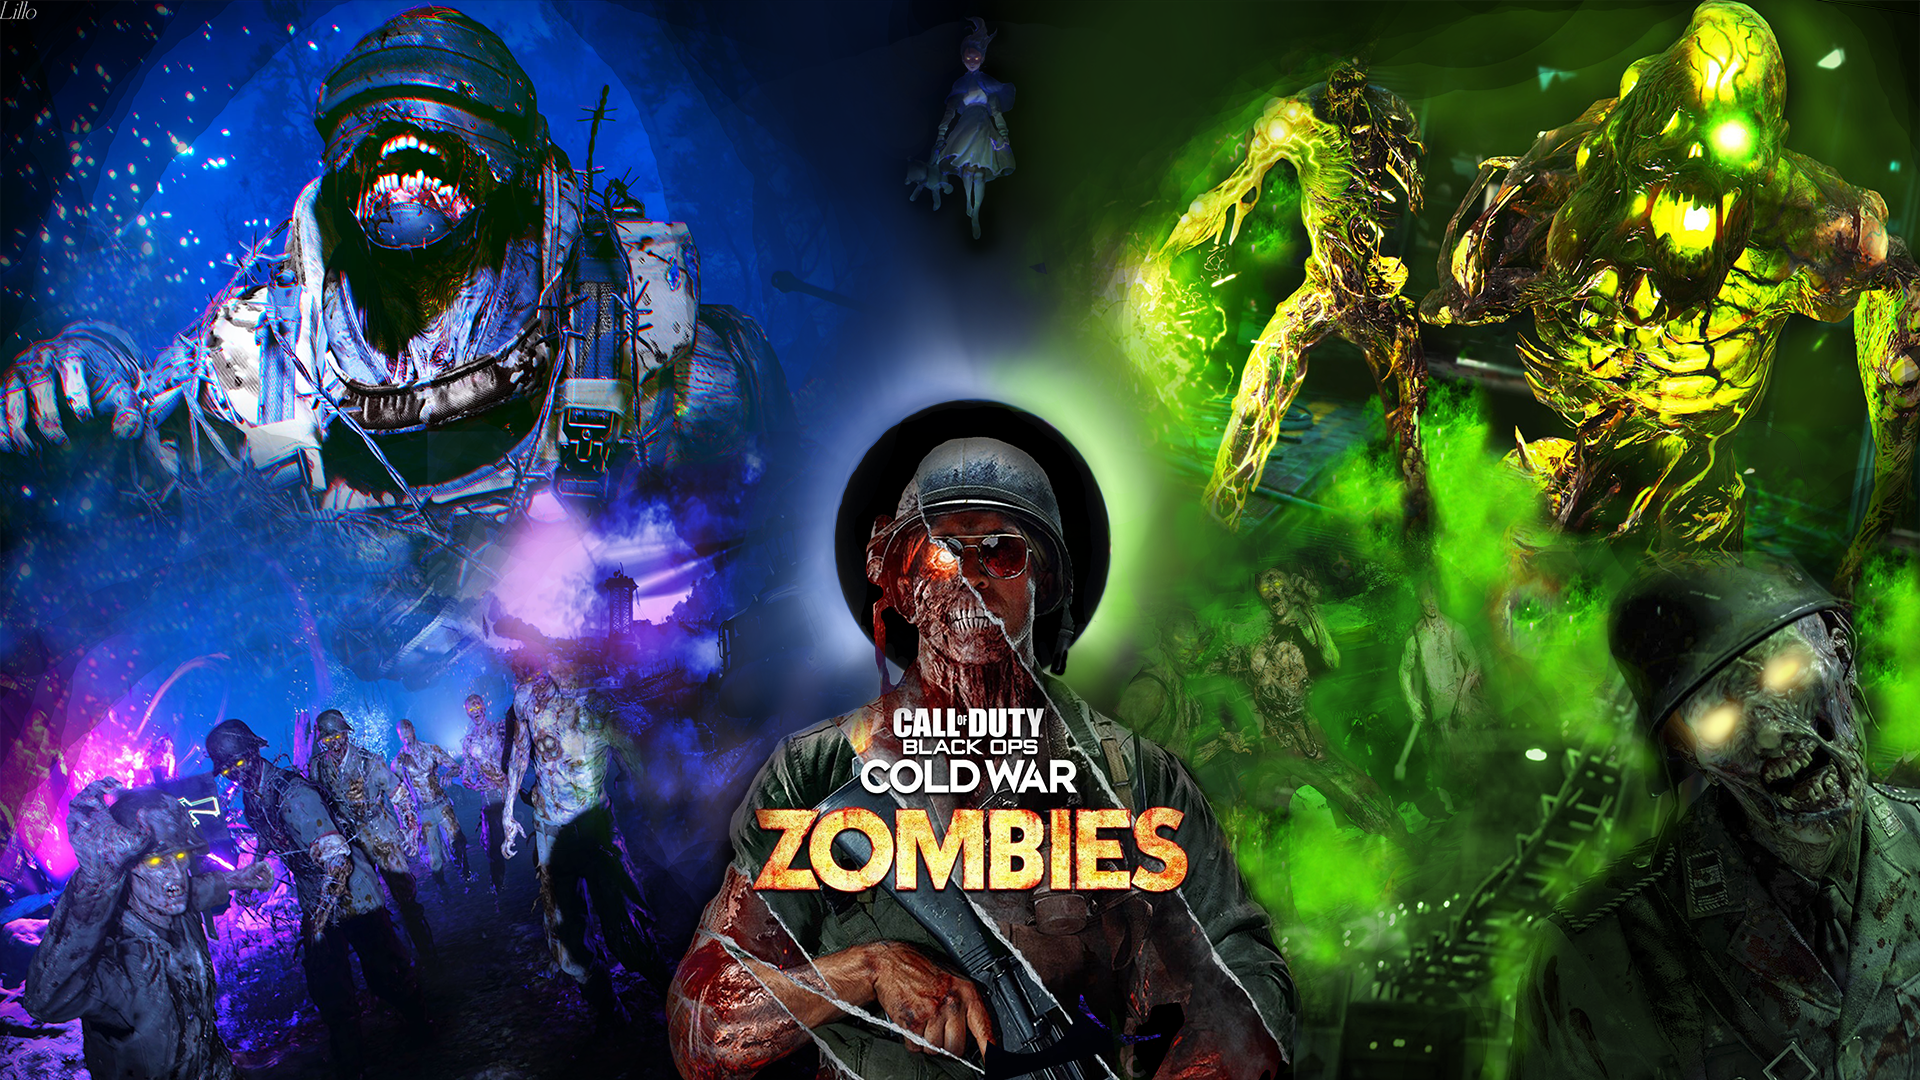 CoD Black Ops: Cold War Zombies I have created! Hope you like it